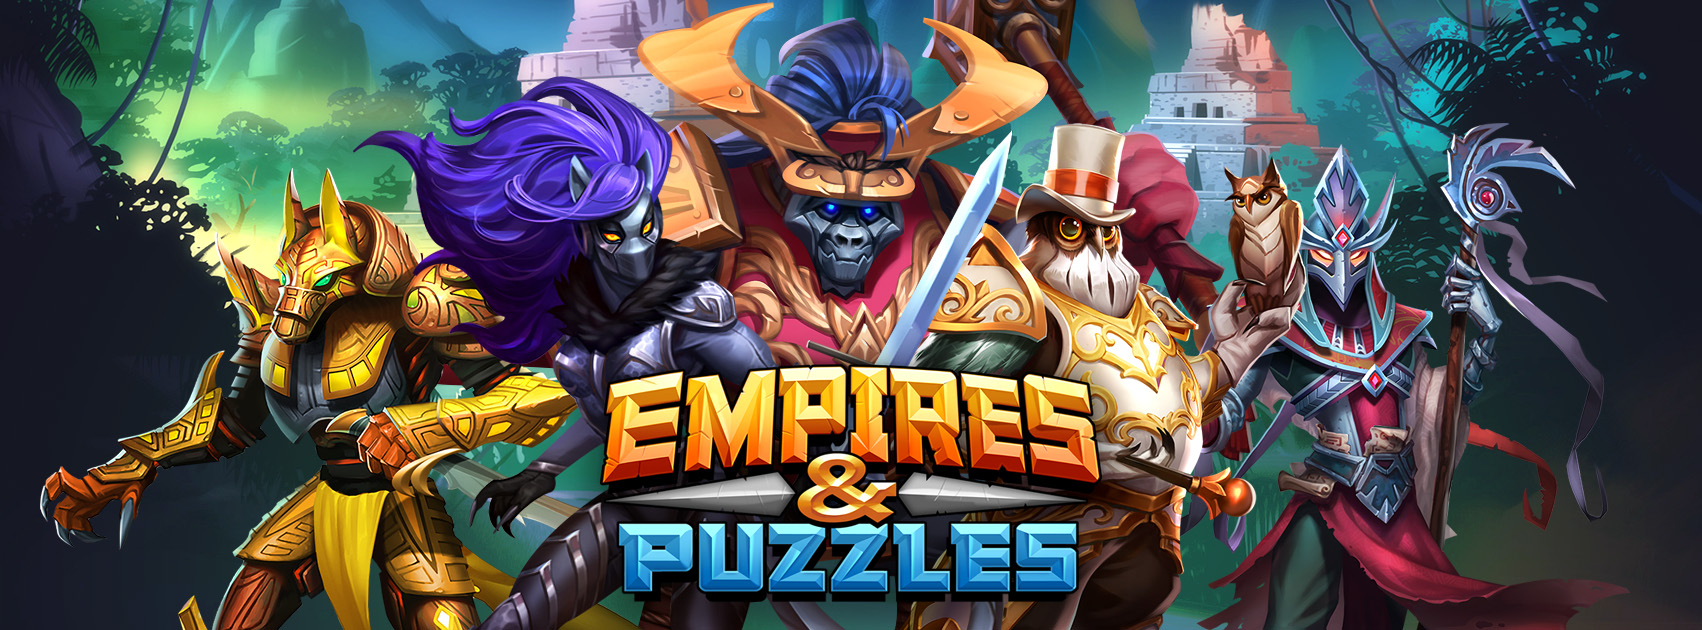 Full Questtrialevent Schedule  January 2020 ?  Empires in Empires And Puzzles Quest Schedule